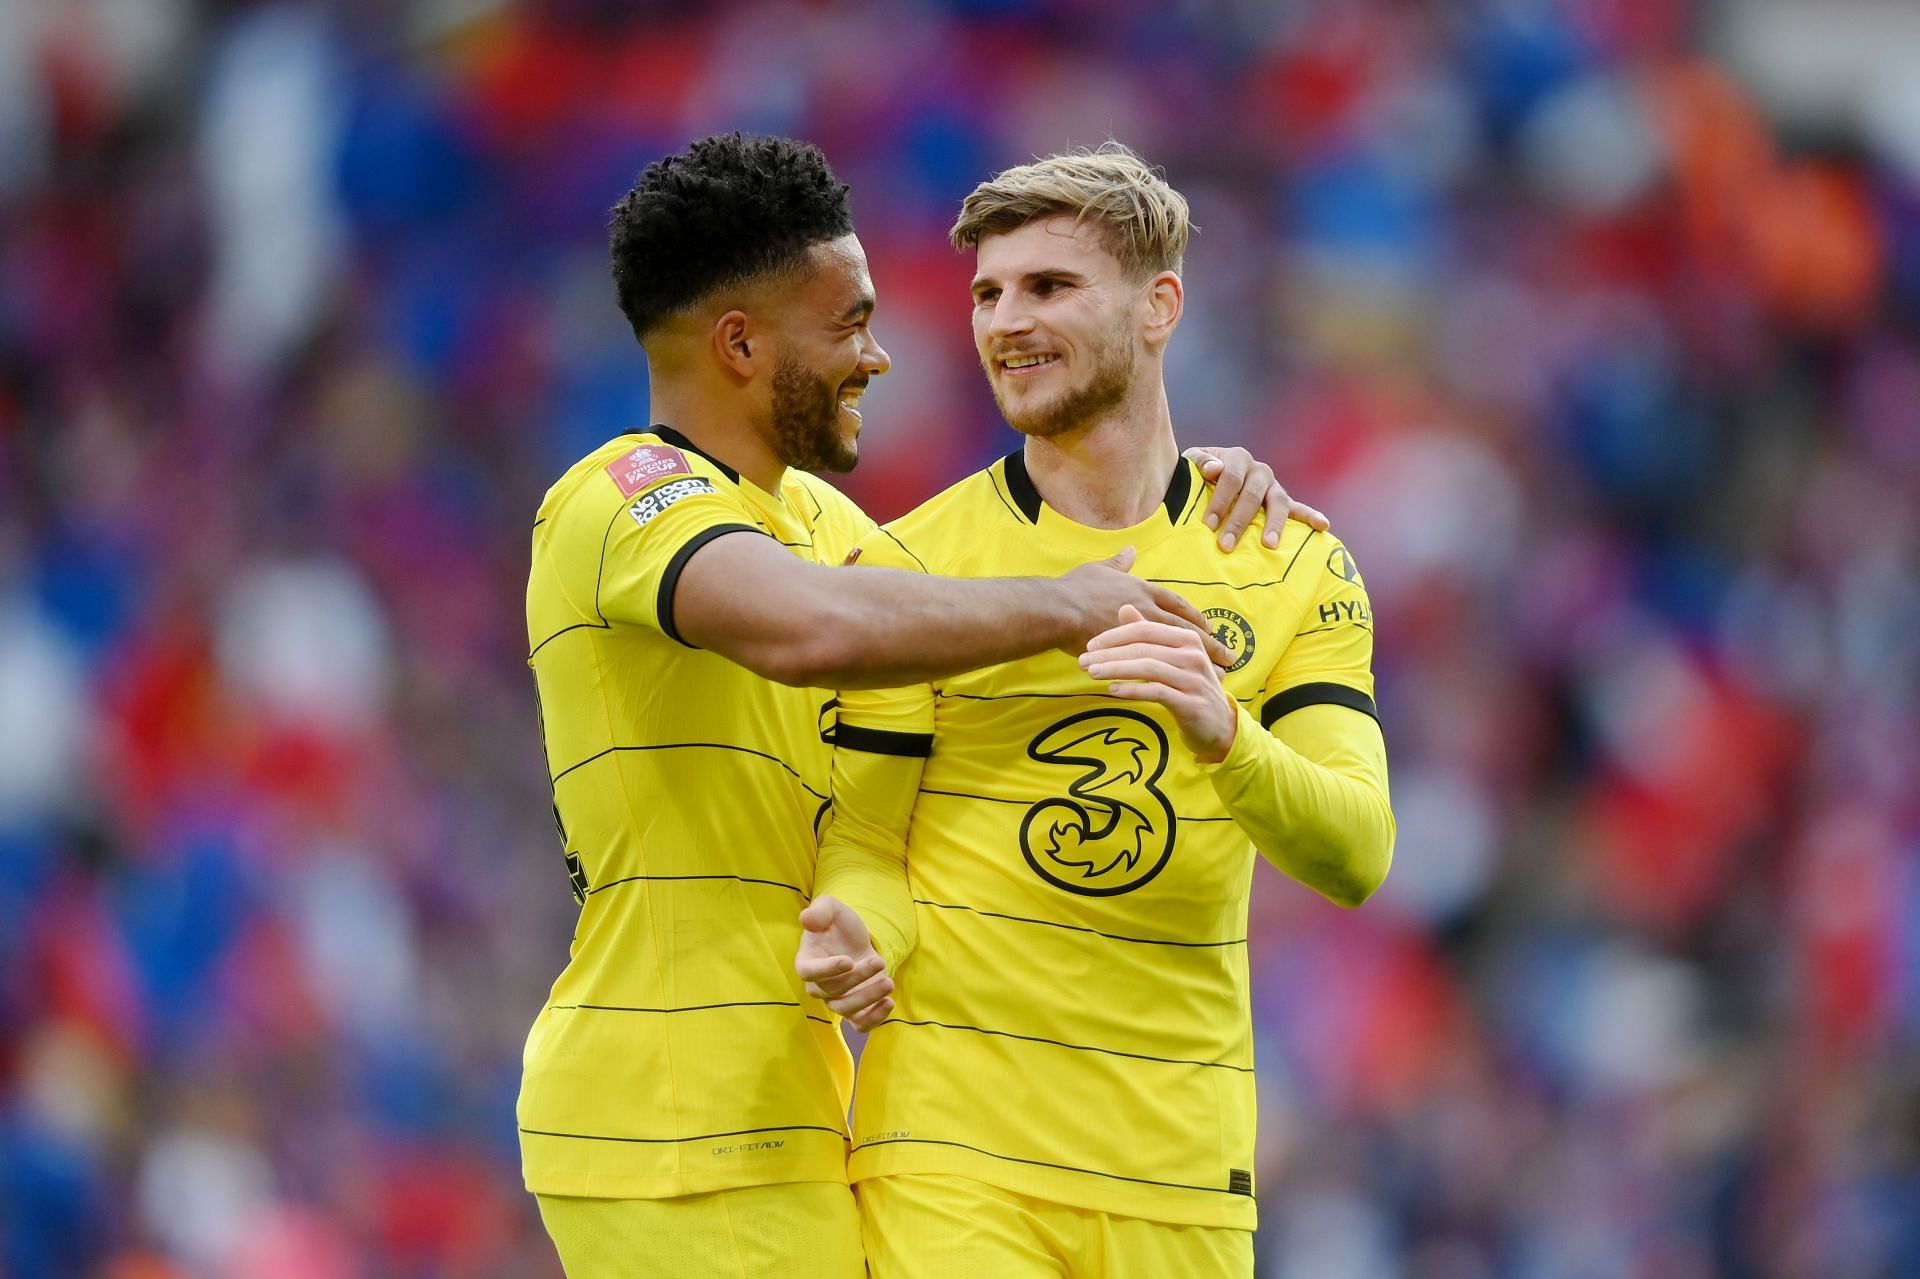 Timo Werner (R) celebrates with Reece James (L)